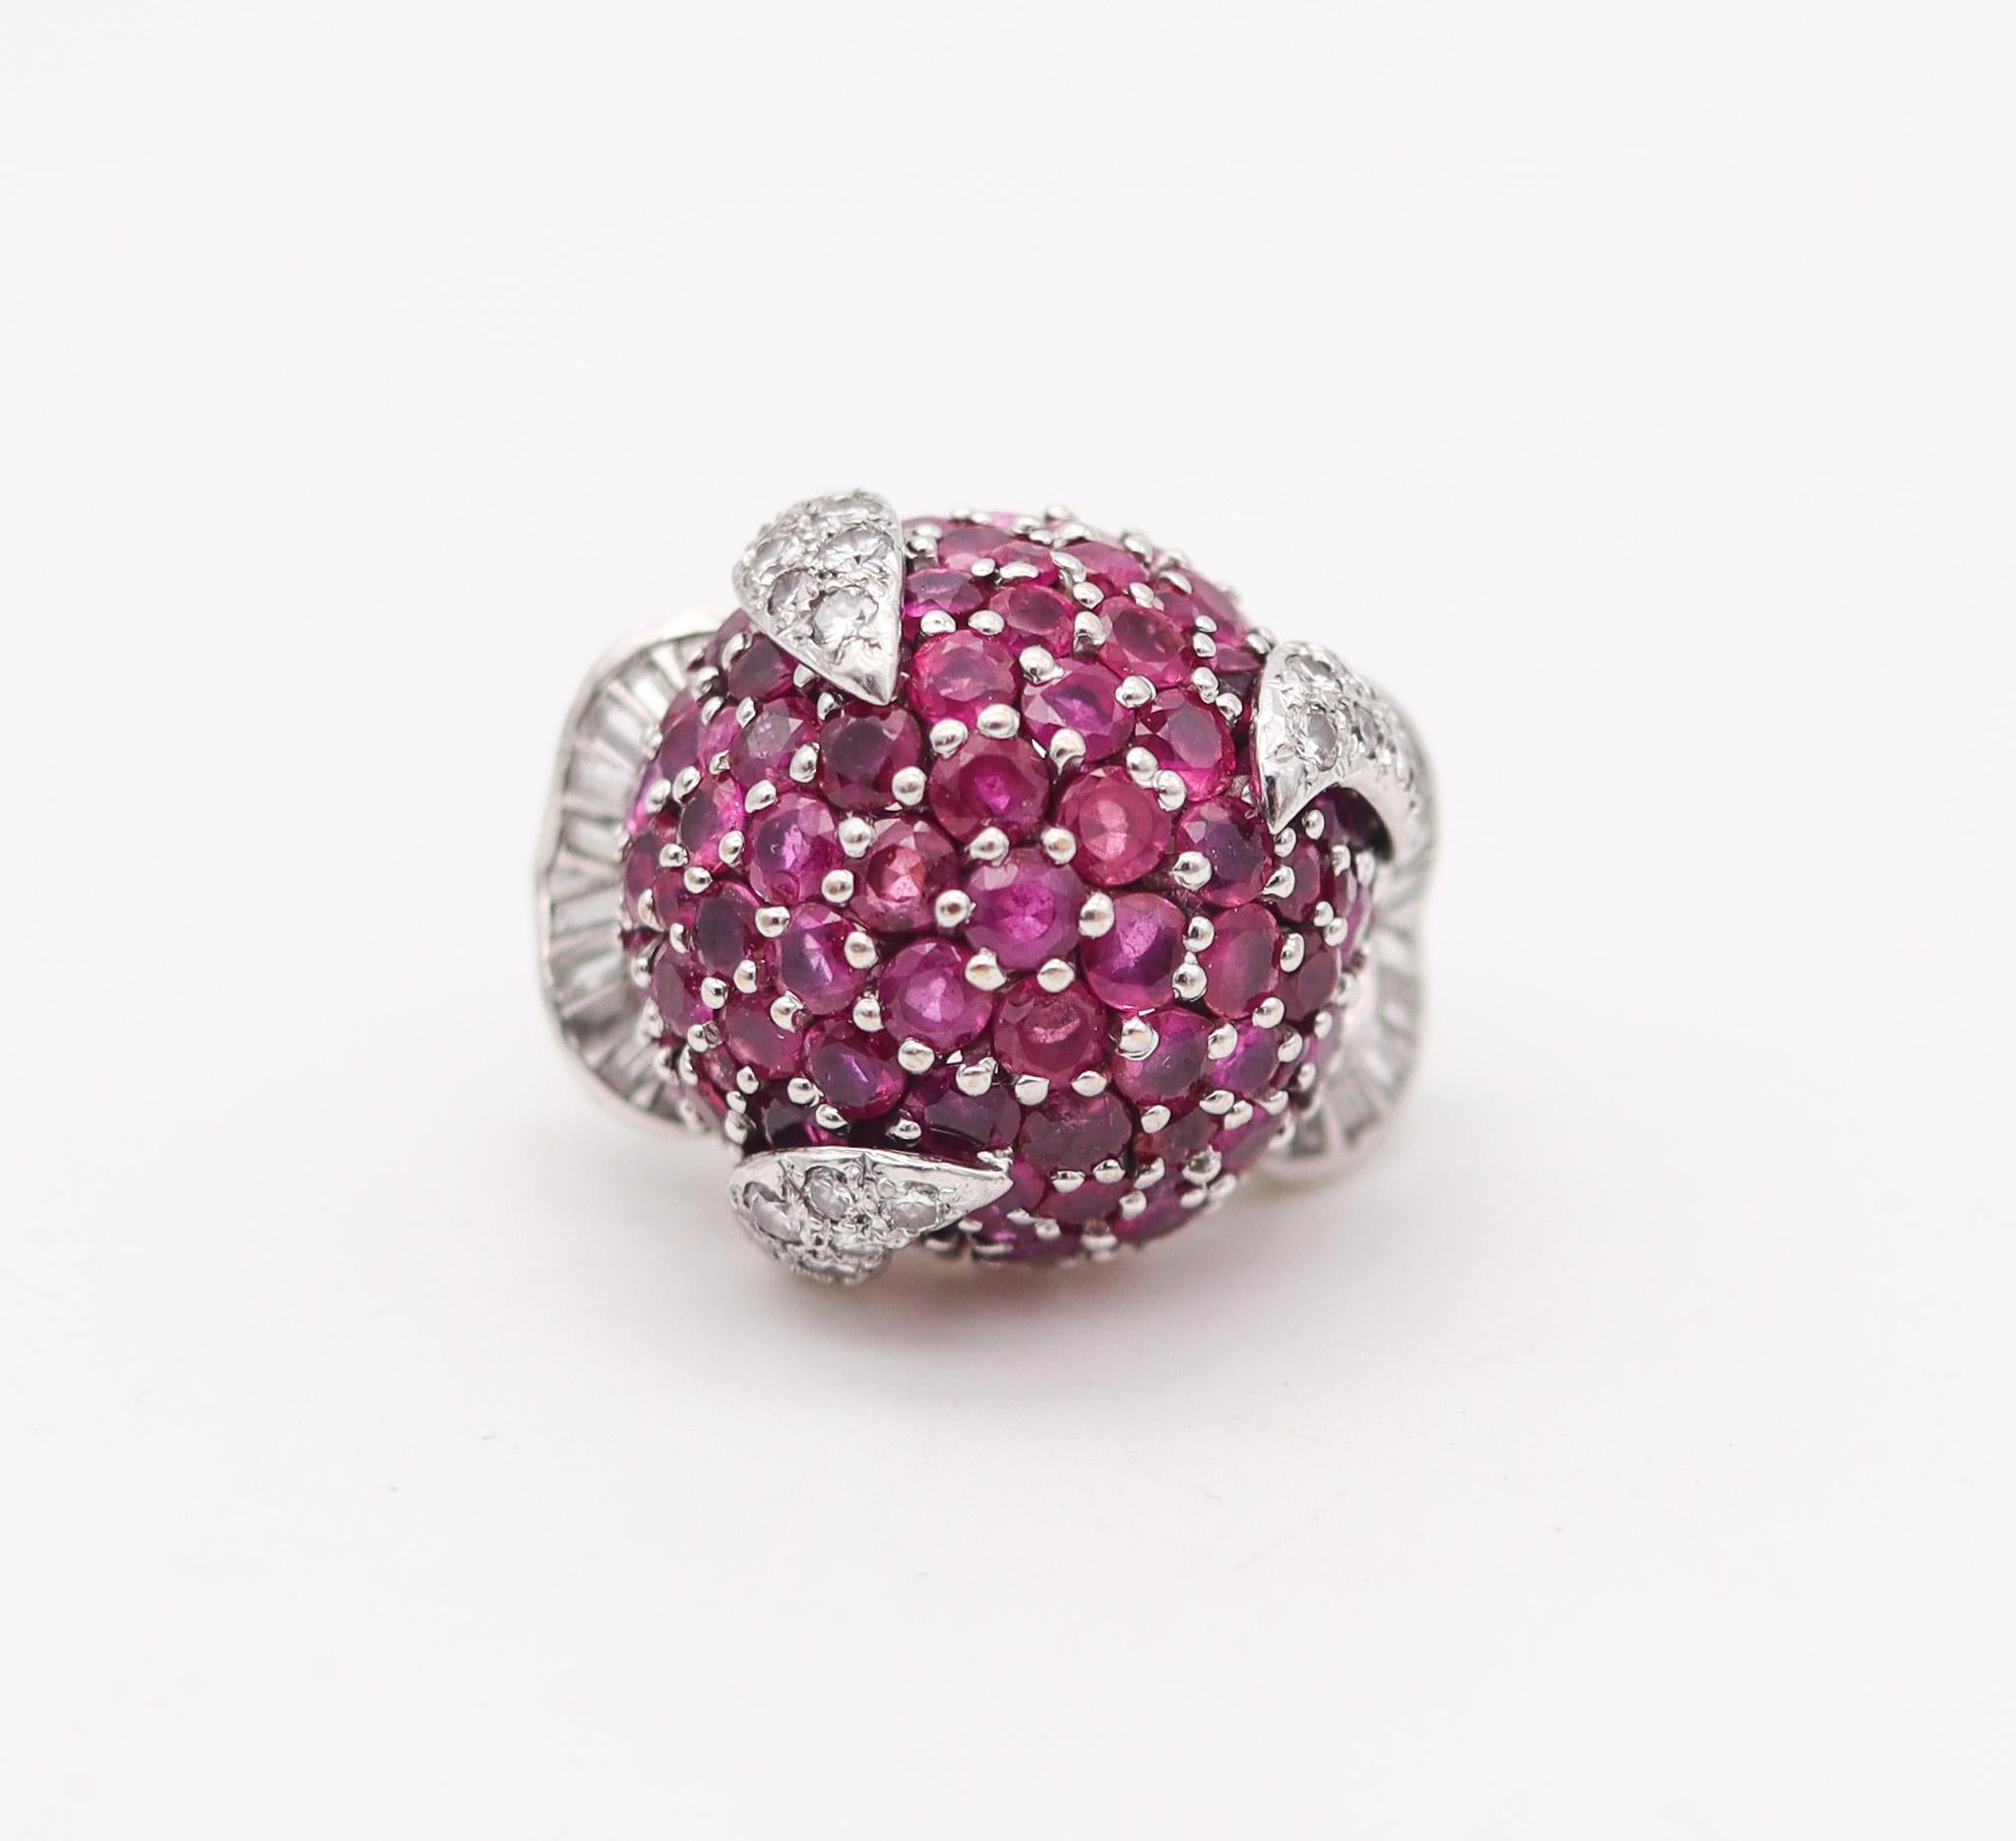 Retro-modernist cocktail ring with gemstones.

Fabulous, oversized bombe cocktail ring, created with retro-modernist patterns, back in the 1960. This cocktail ring has been crafted with a bold look and great eye appeal in solid white gold of 18